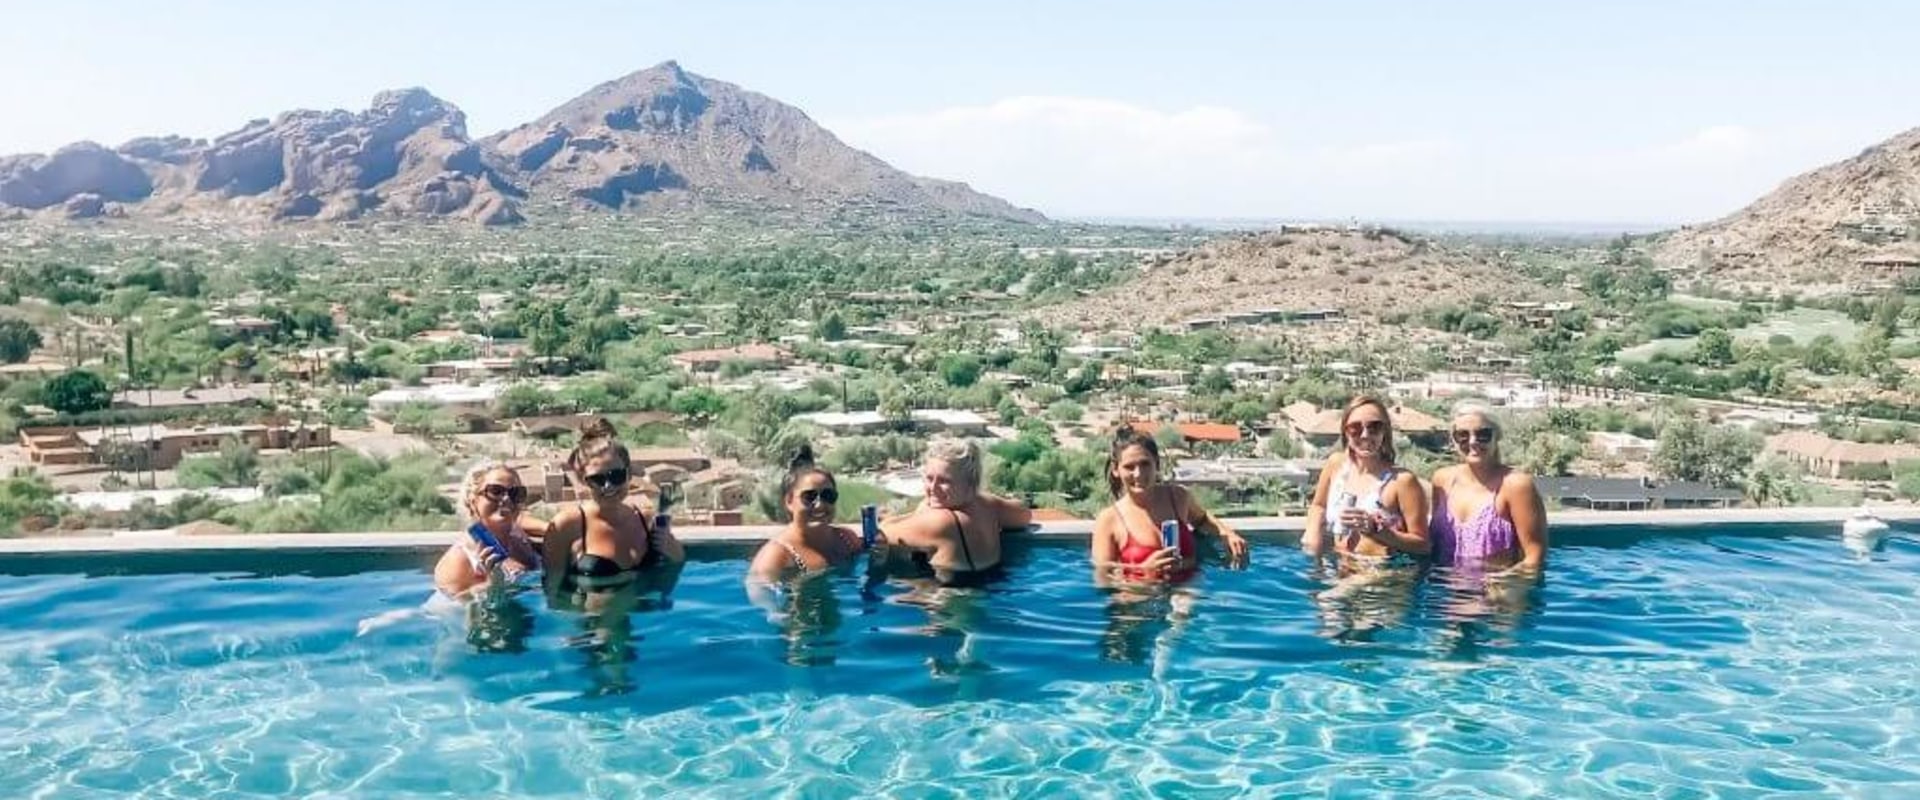 Why is scottsdale so popular for bachelorette party?